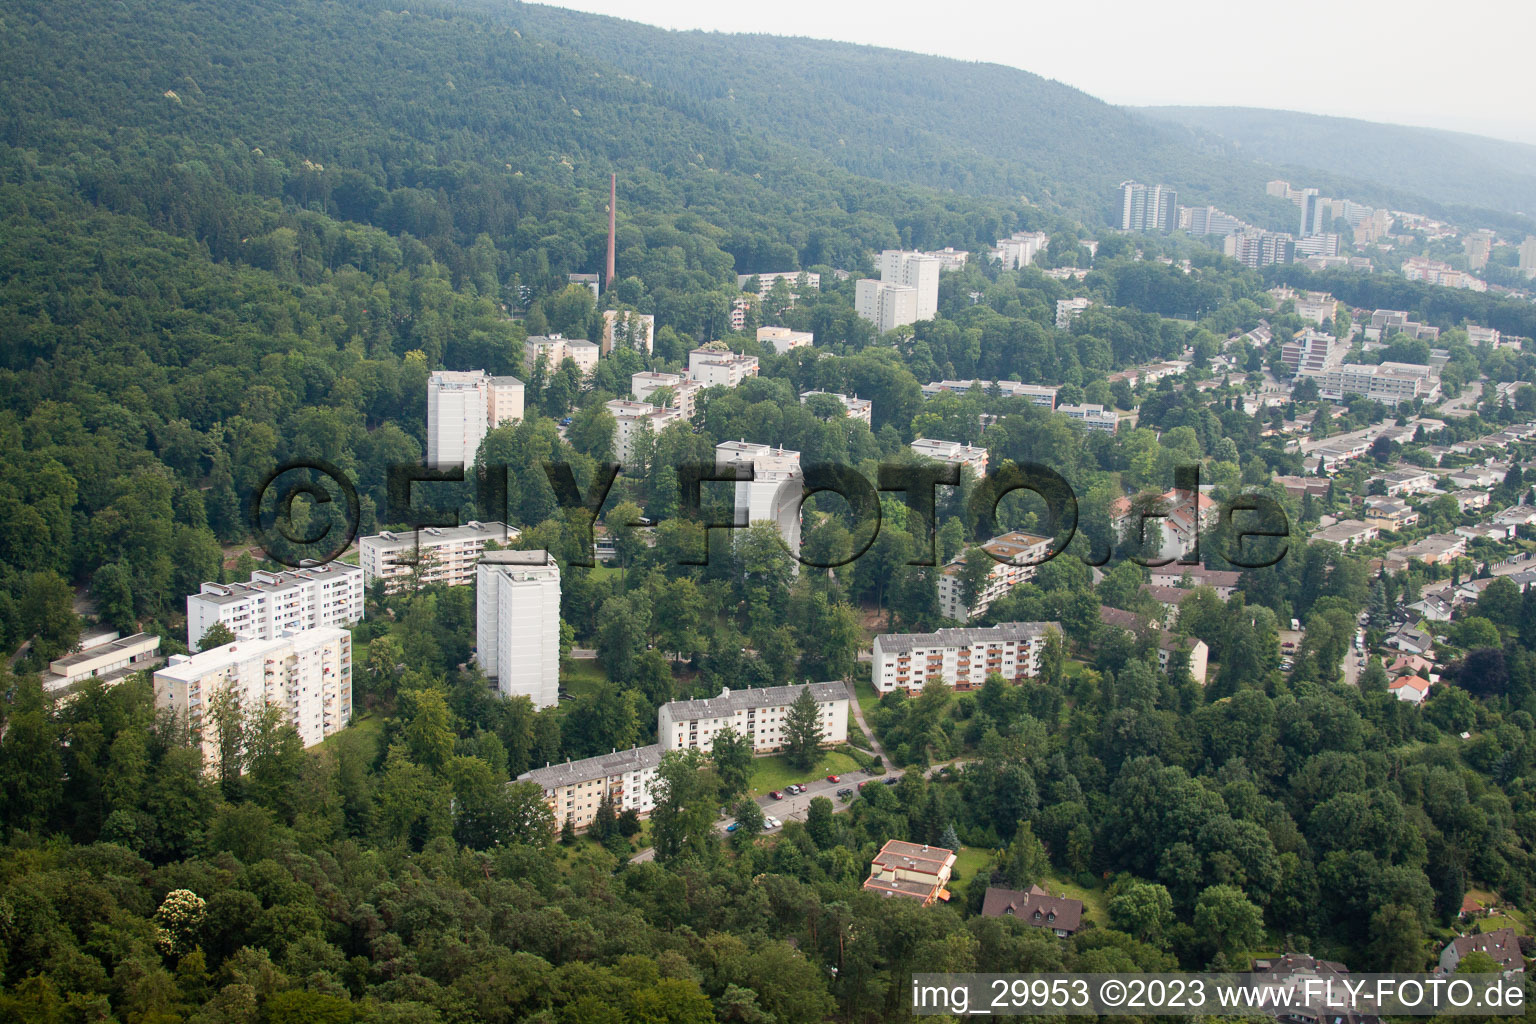 Aerial photograpy of HD-Boxberg from the north in the district Boxberg in Heidelberg in the state Baden-Wuerttemberg, Germany